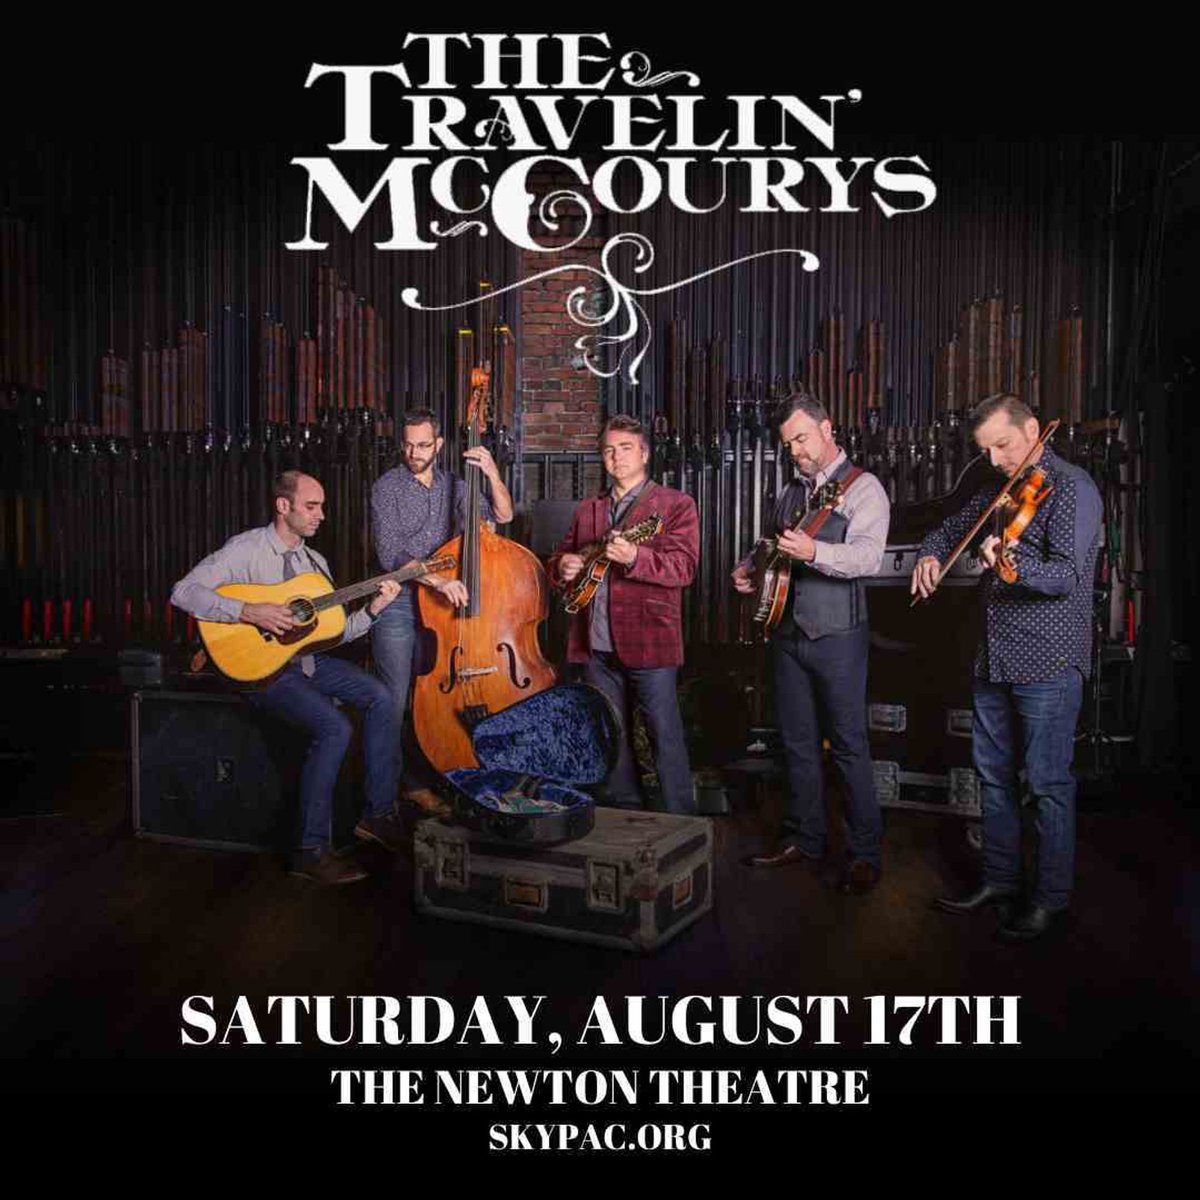 We’ll be in Newton, NJ playing at the Newton Theatre on 8/17 🎻 Tickets on our website! #newtonnj #bluegrass #livemusic